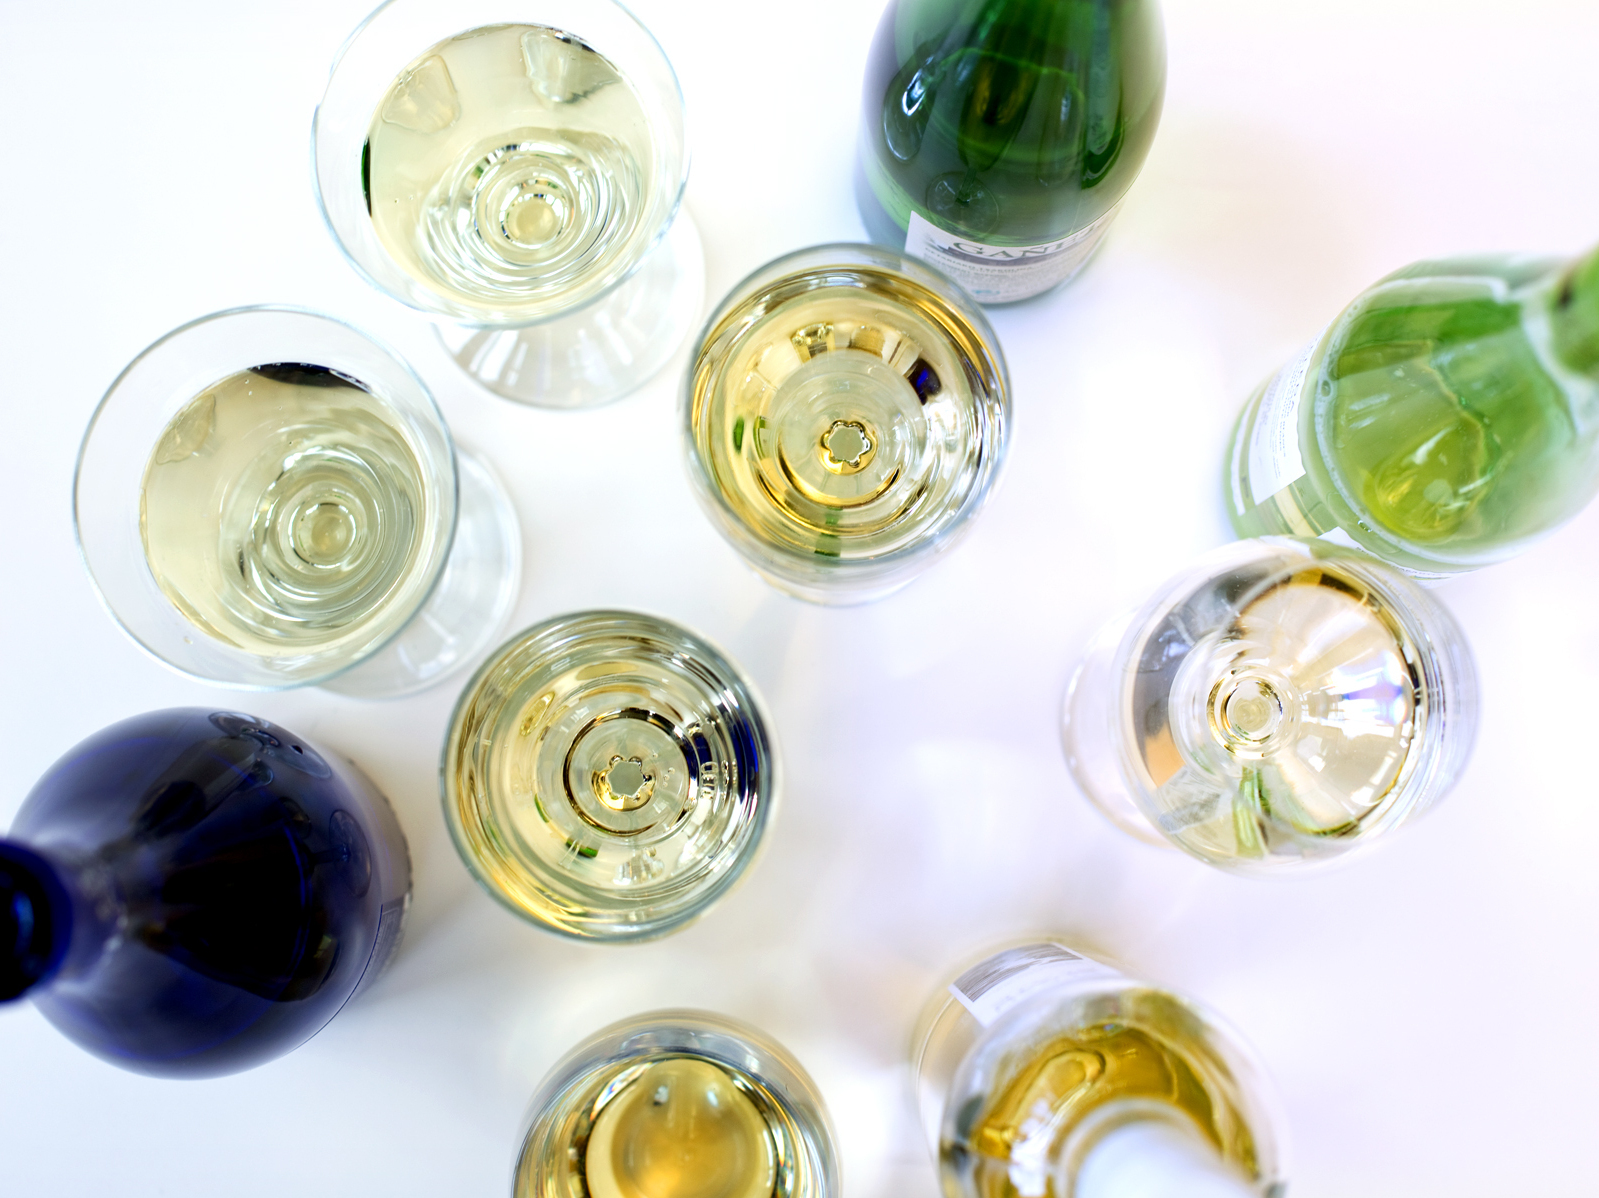 A selection of low-alcohol wines, including a Riesling from Germany, a Vinho Verde from Portugal and a Txakoli from the Basque region of Spain. Photo: Meredith Rizzo/NPR